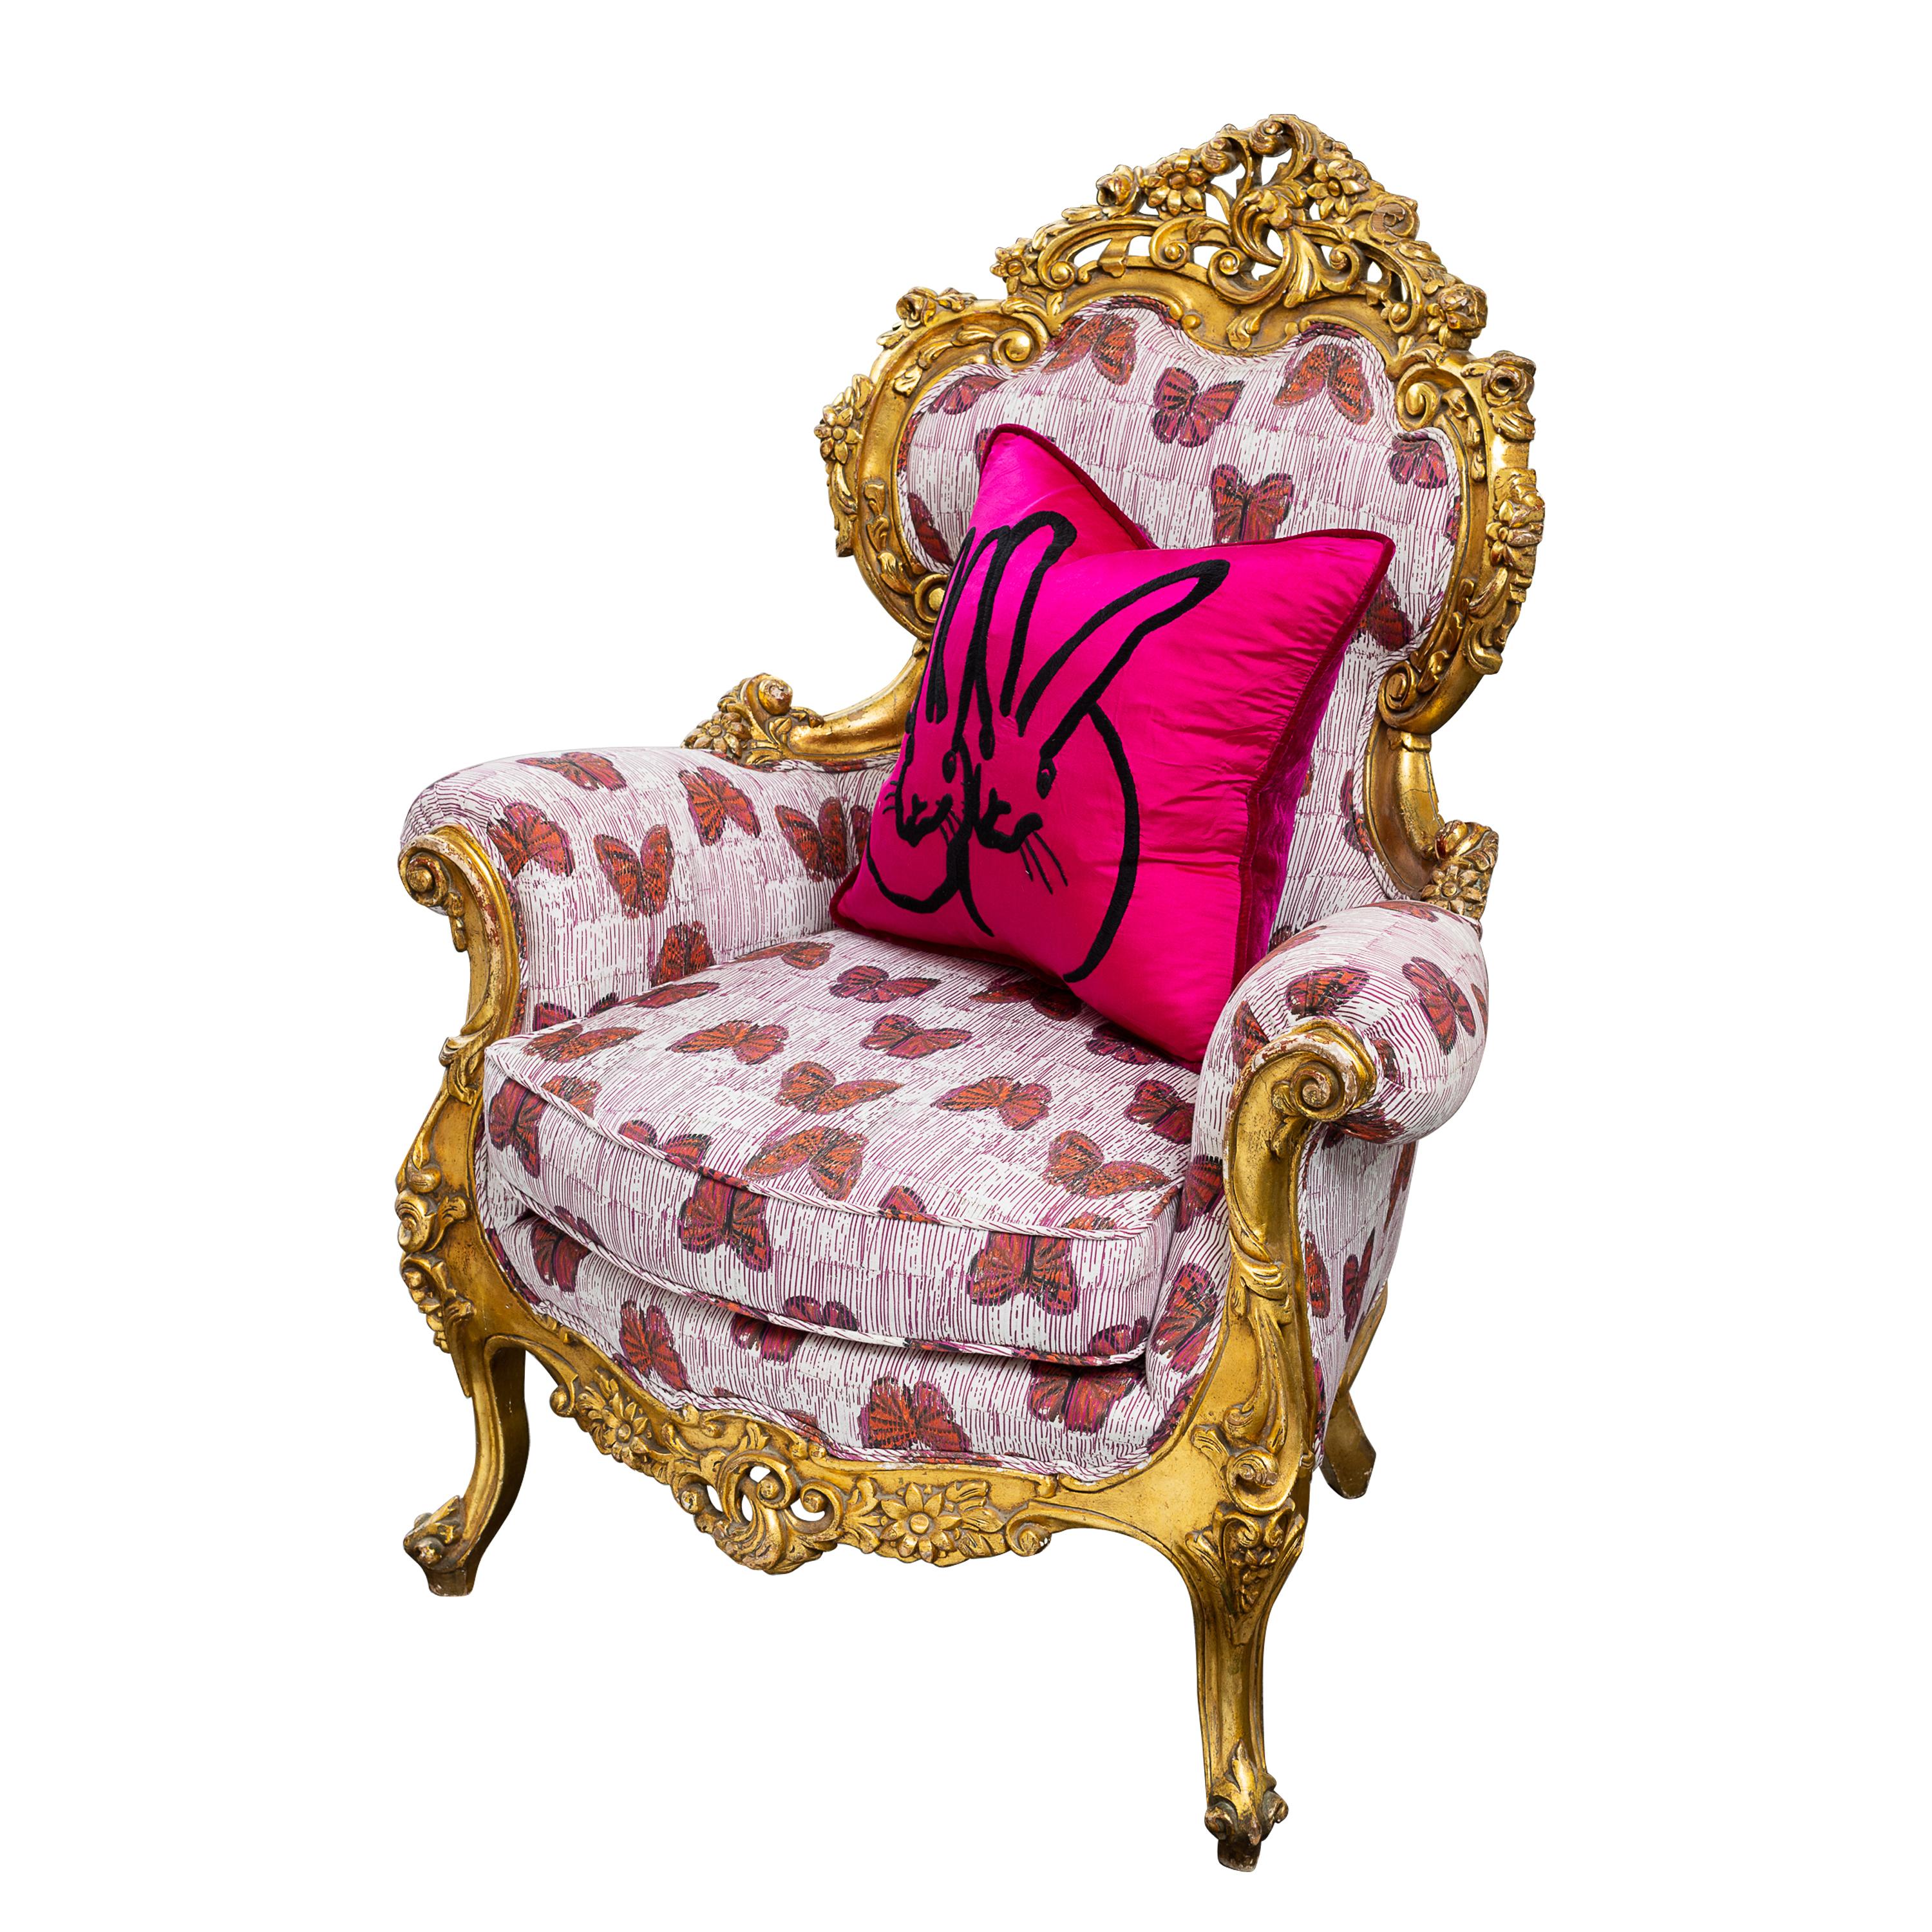 Pair of Antique 19th Century Louis XV Style Heavily Carved Gold Leaf Bergere Chairs. The chairs are covered in a Hunt Slonem Pretty in Pink Butterflies Print and can be sold separately.